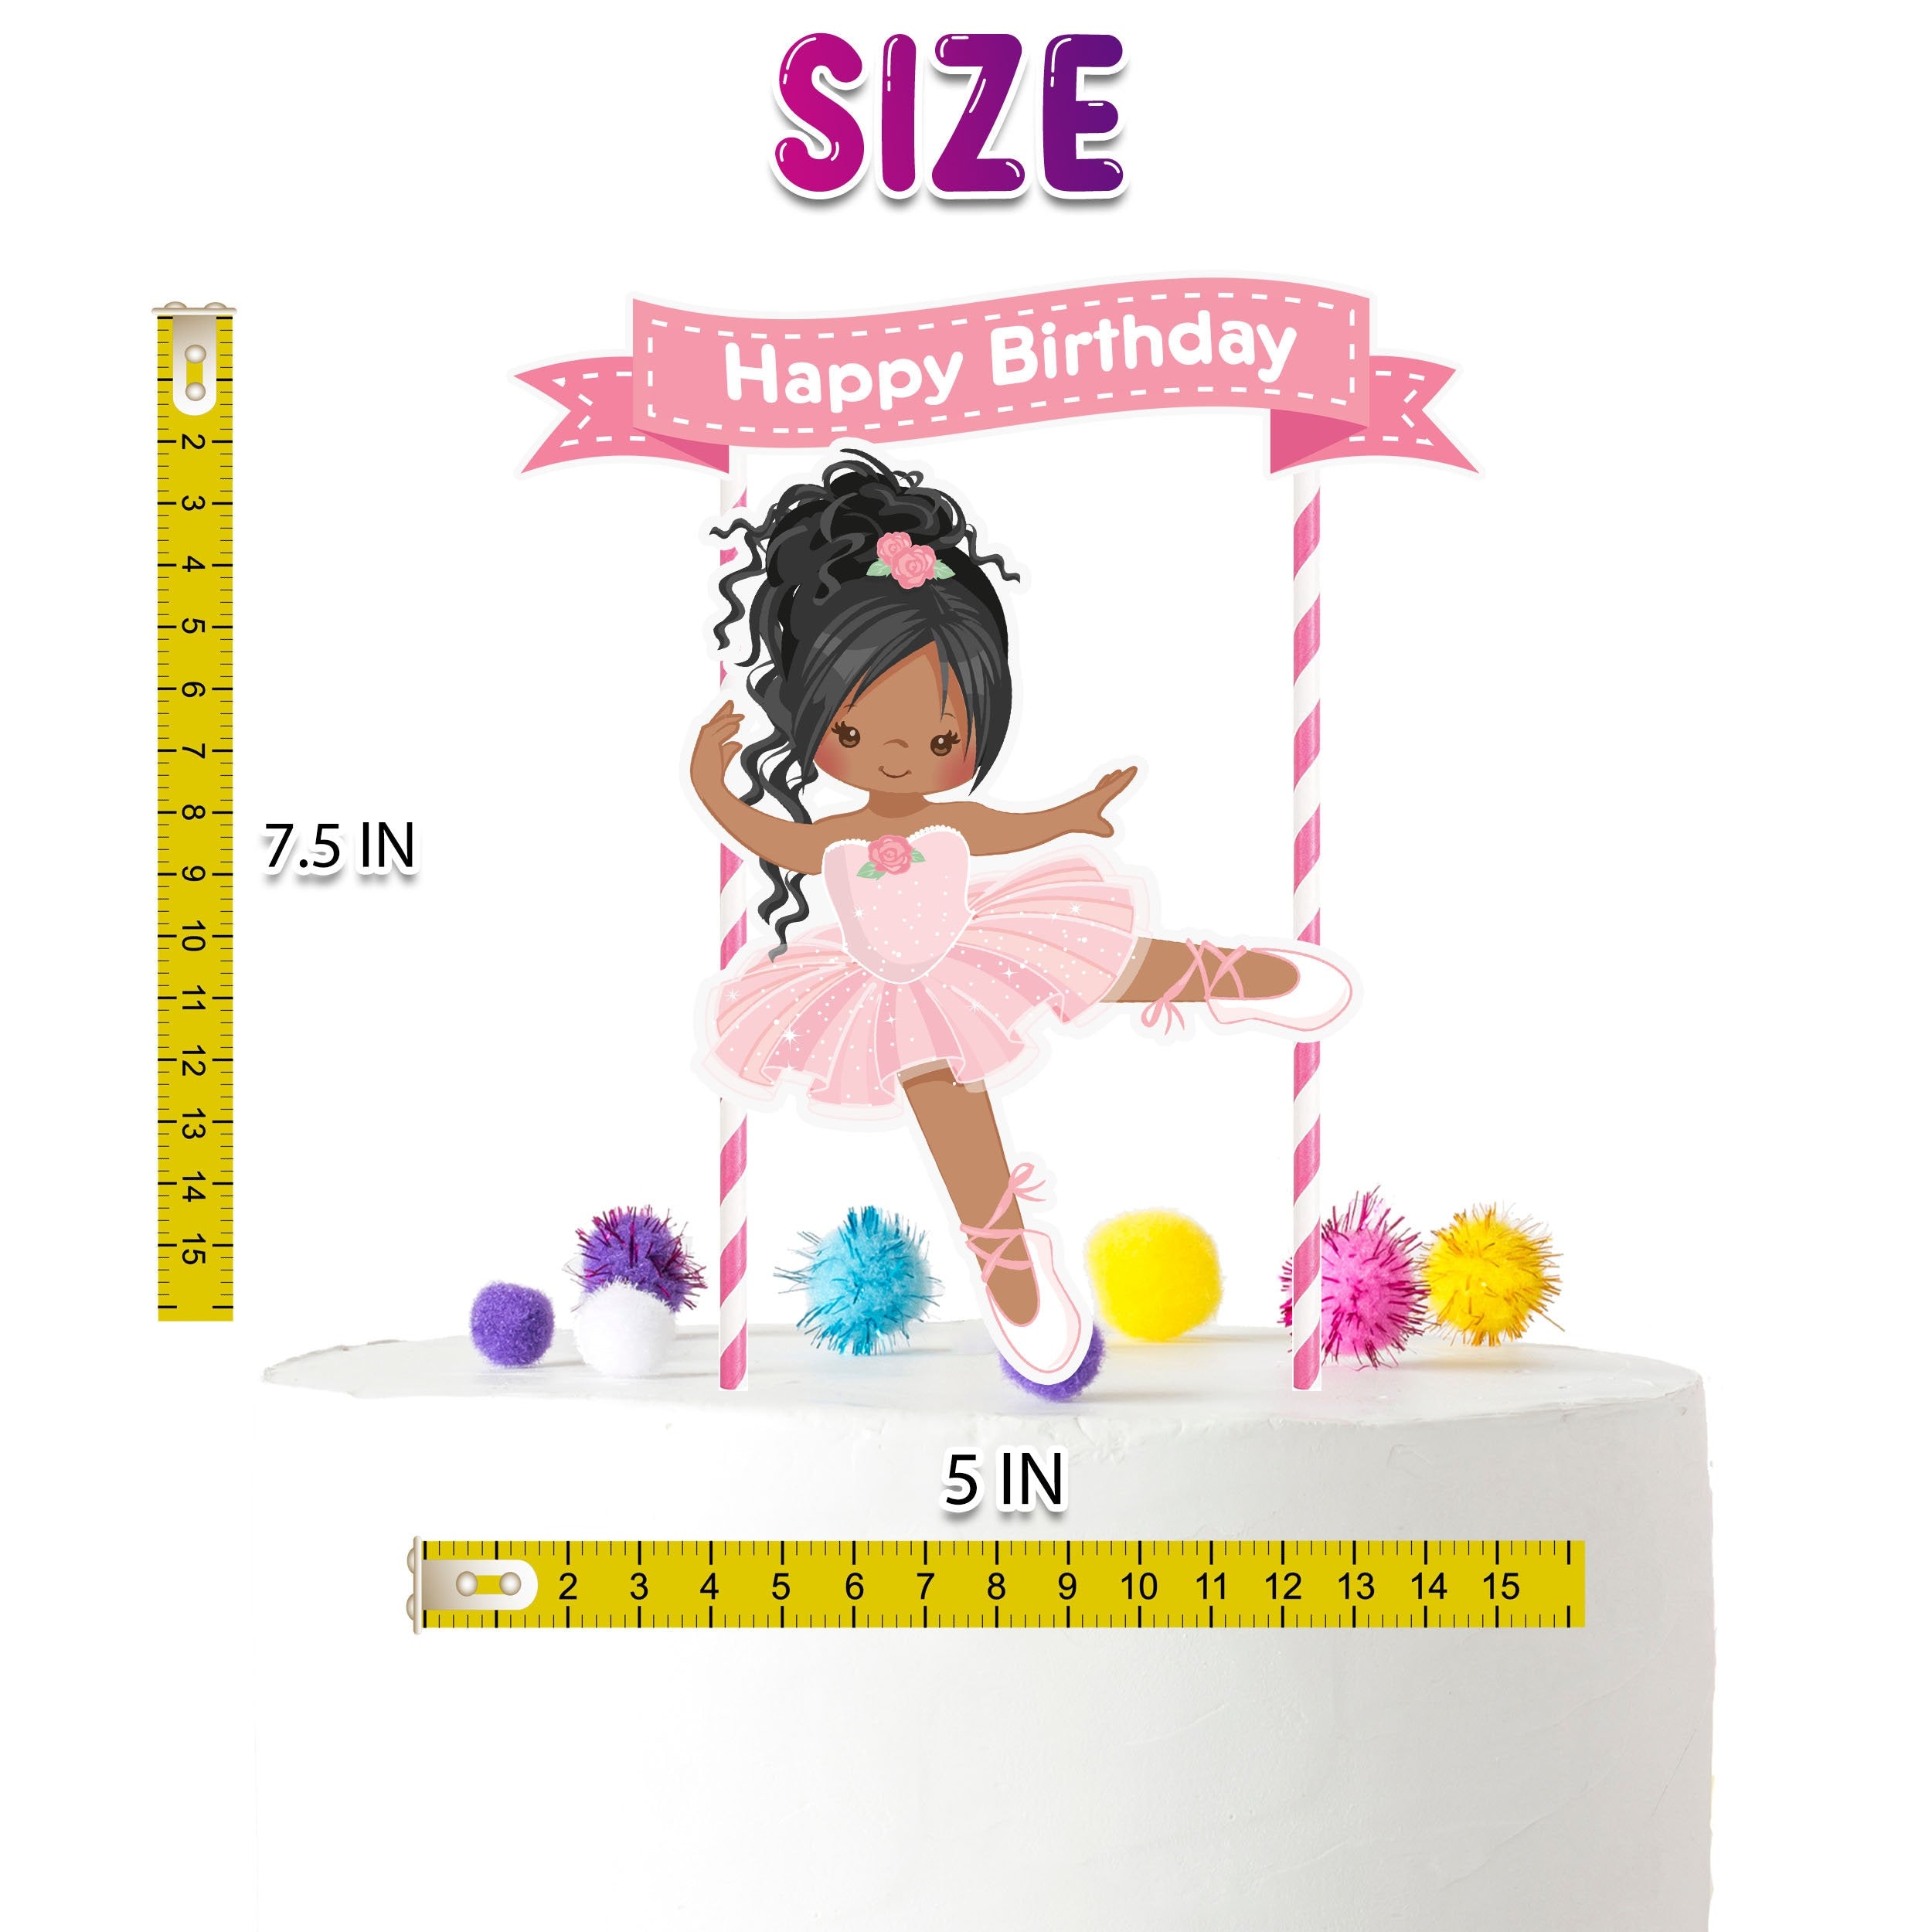 Adorable Afro Ballerina Cake Topper – Perfect Pirouette for a Birthday Celebration